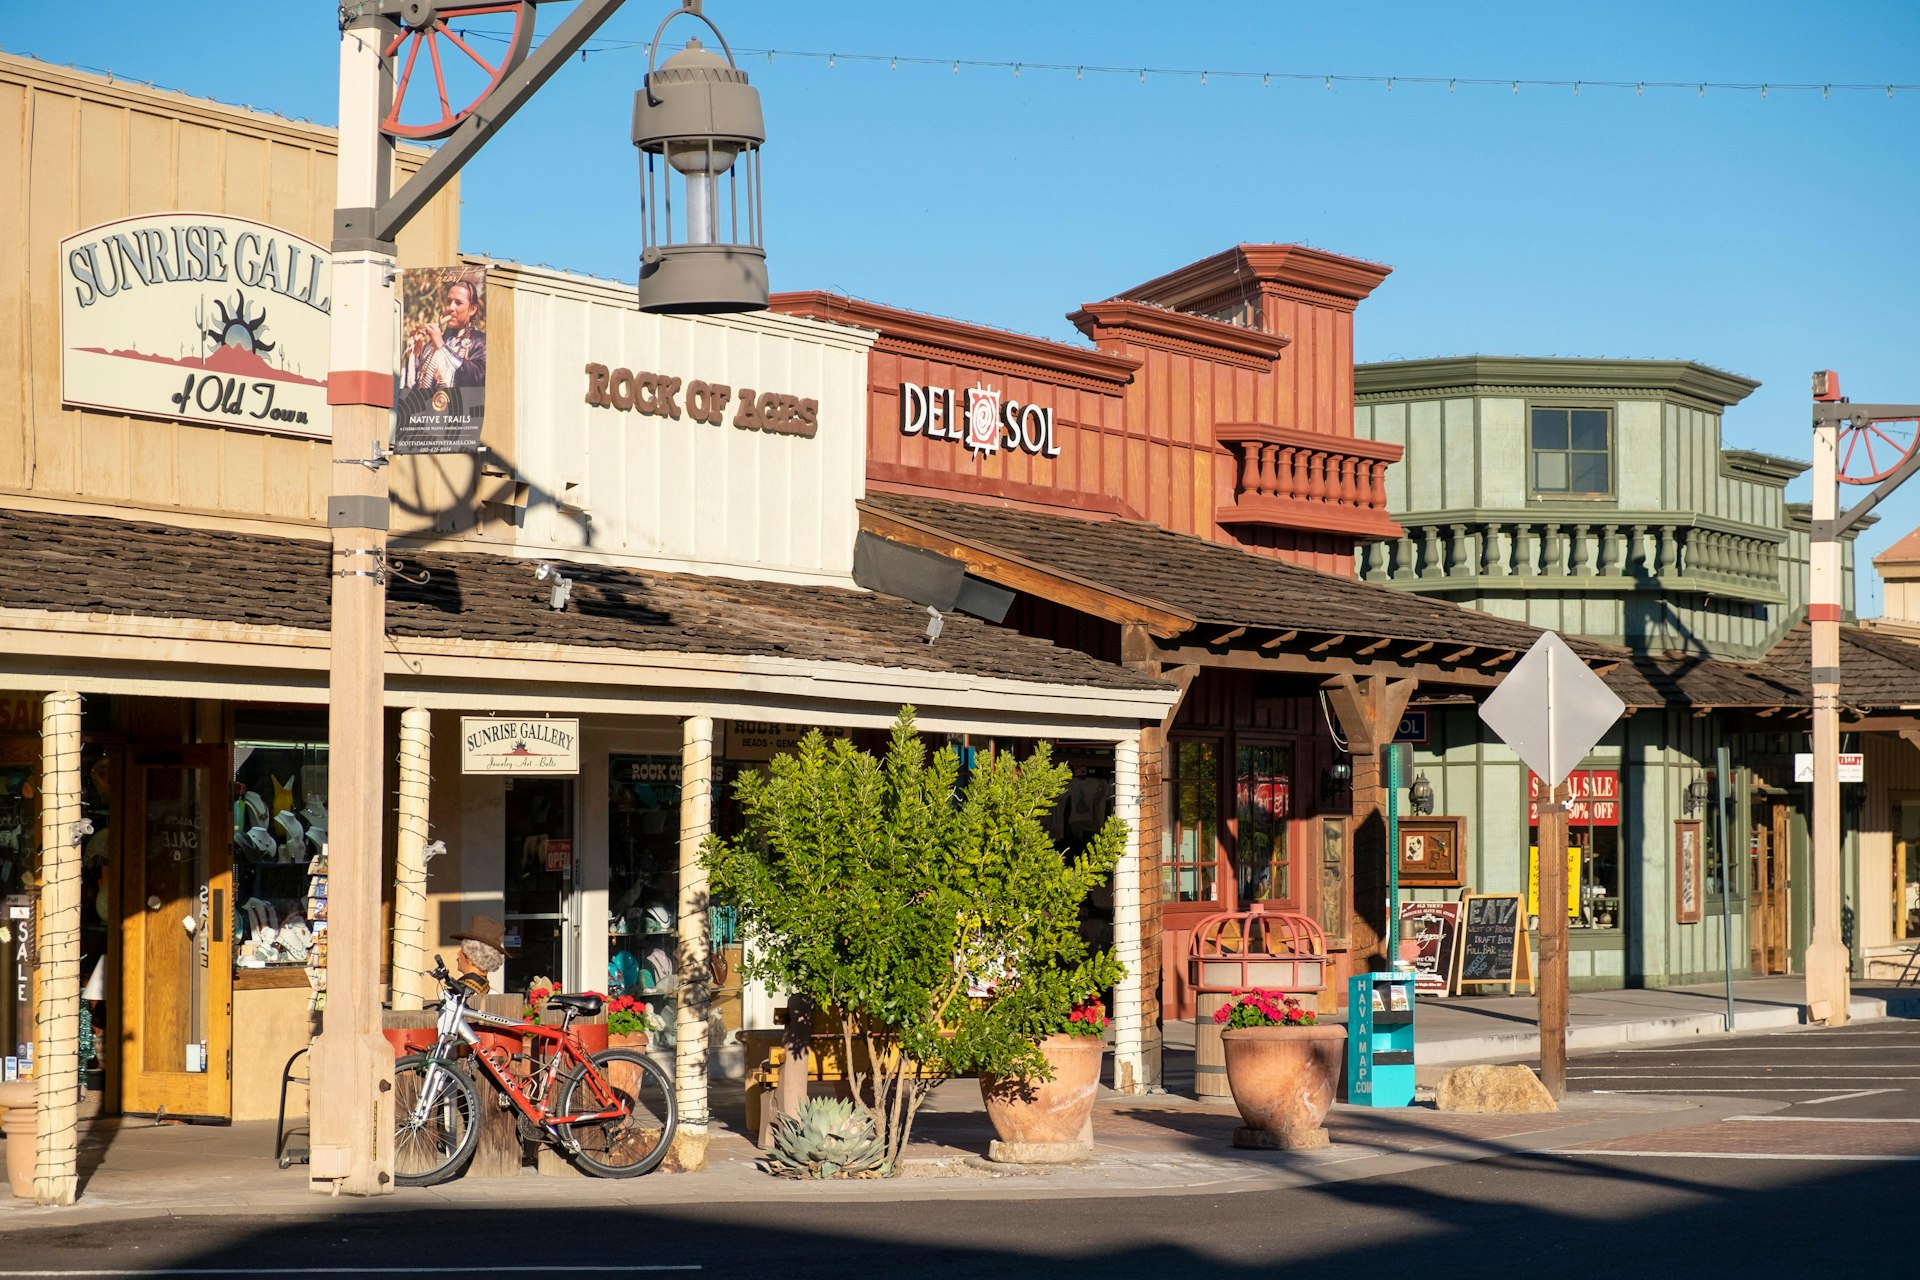 Stores in Old Town Scottsdale